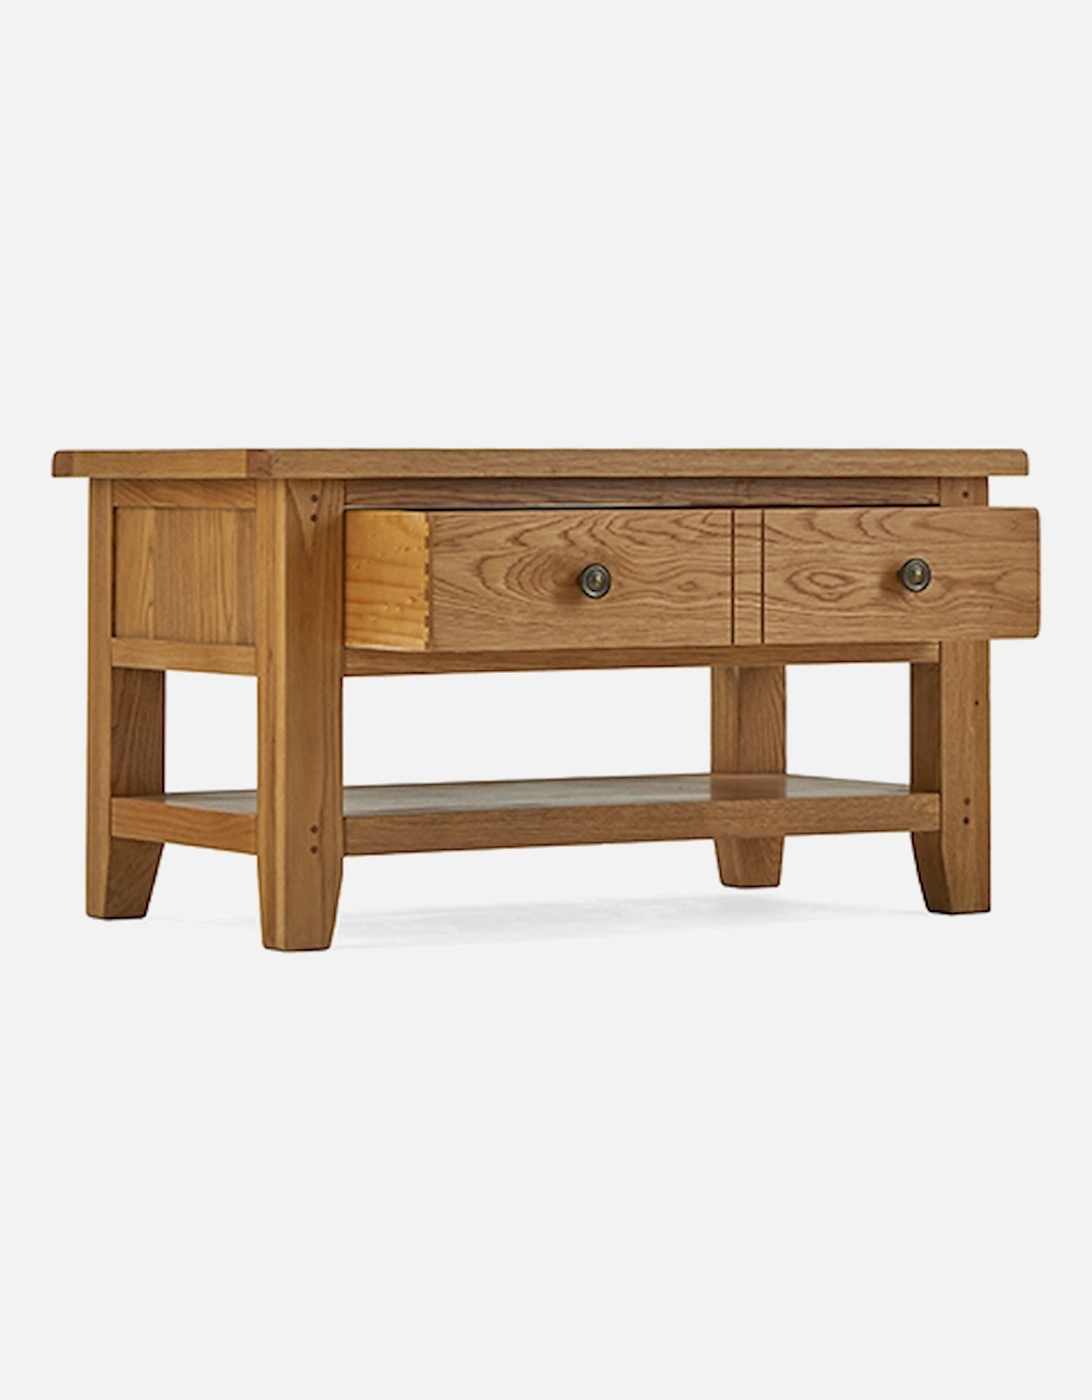 Burford Small Coffee Table With Drawers